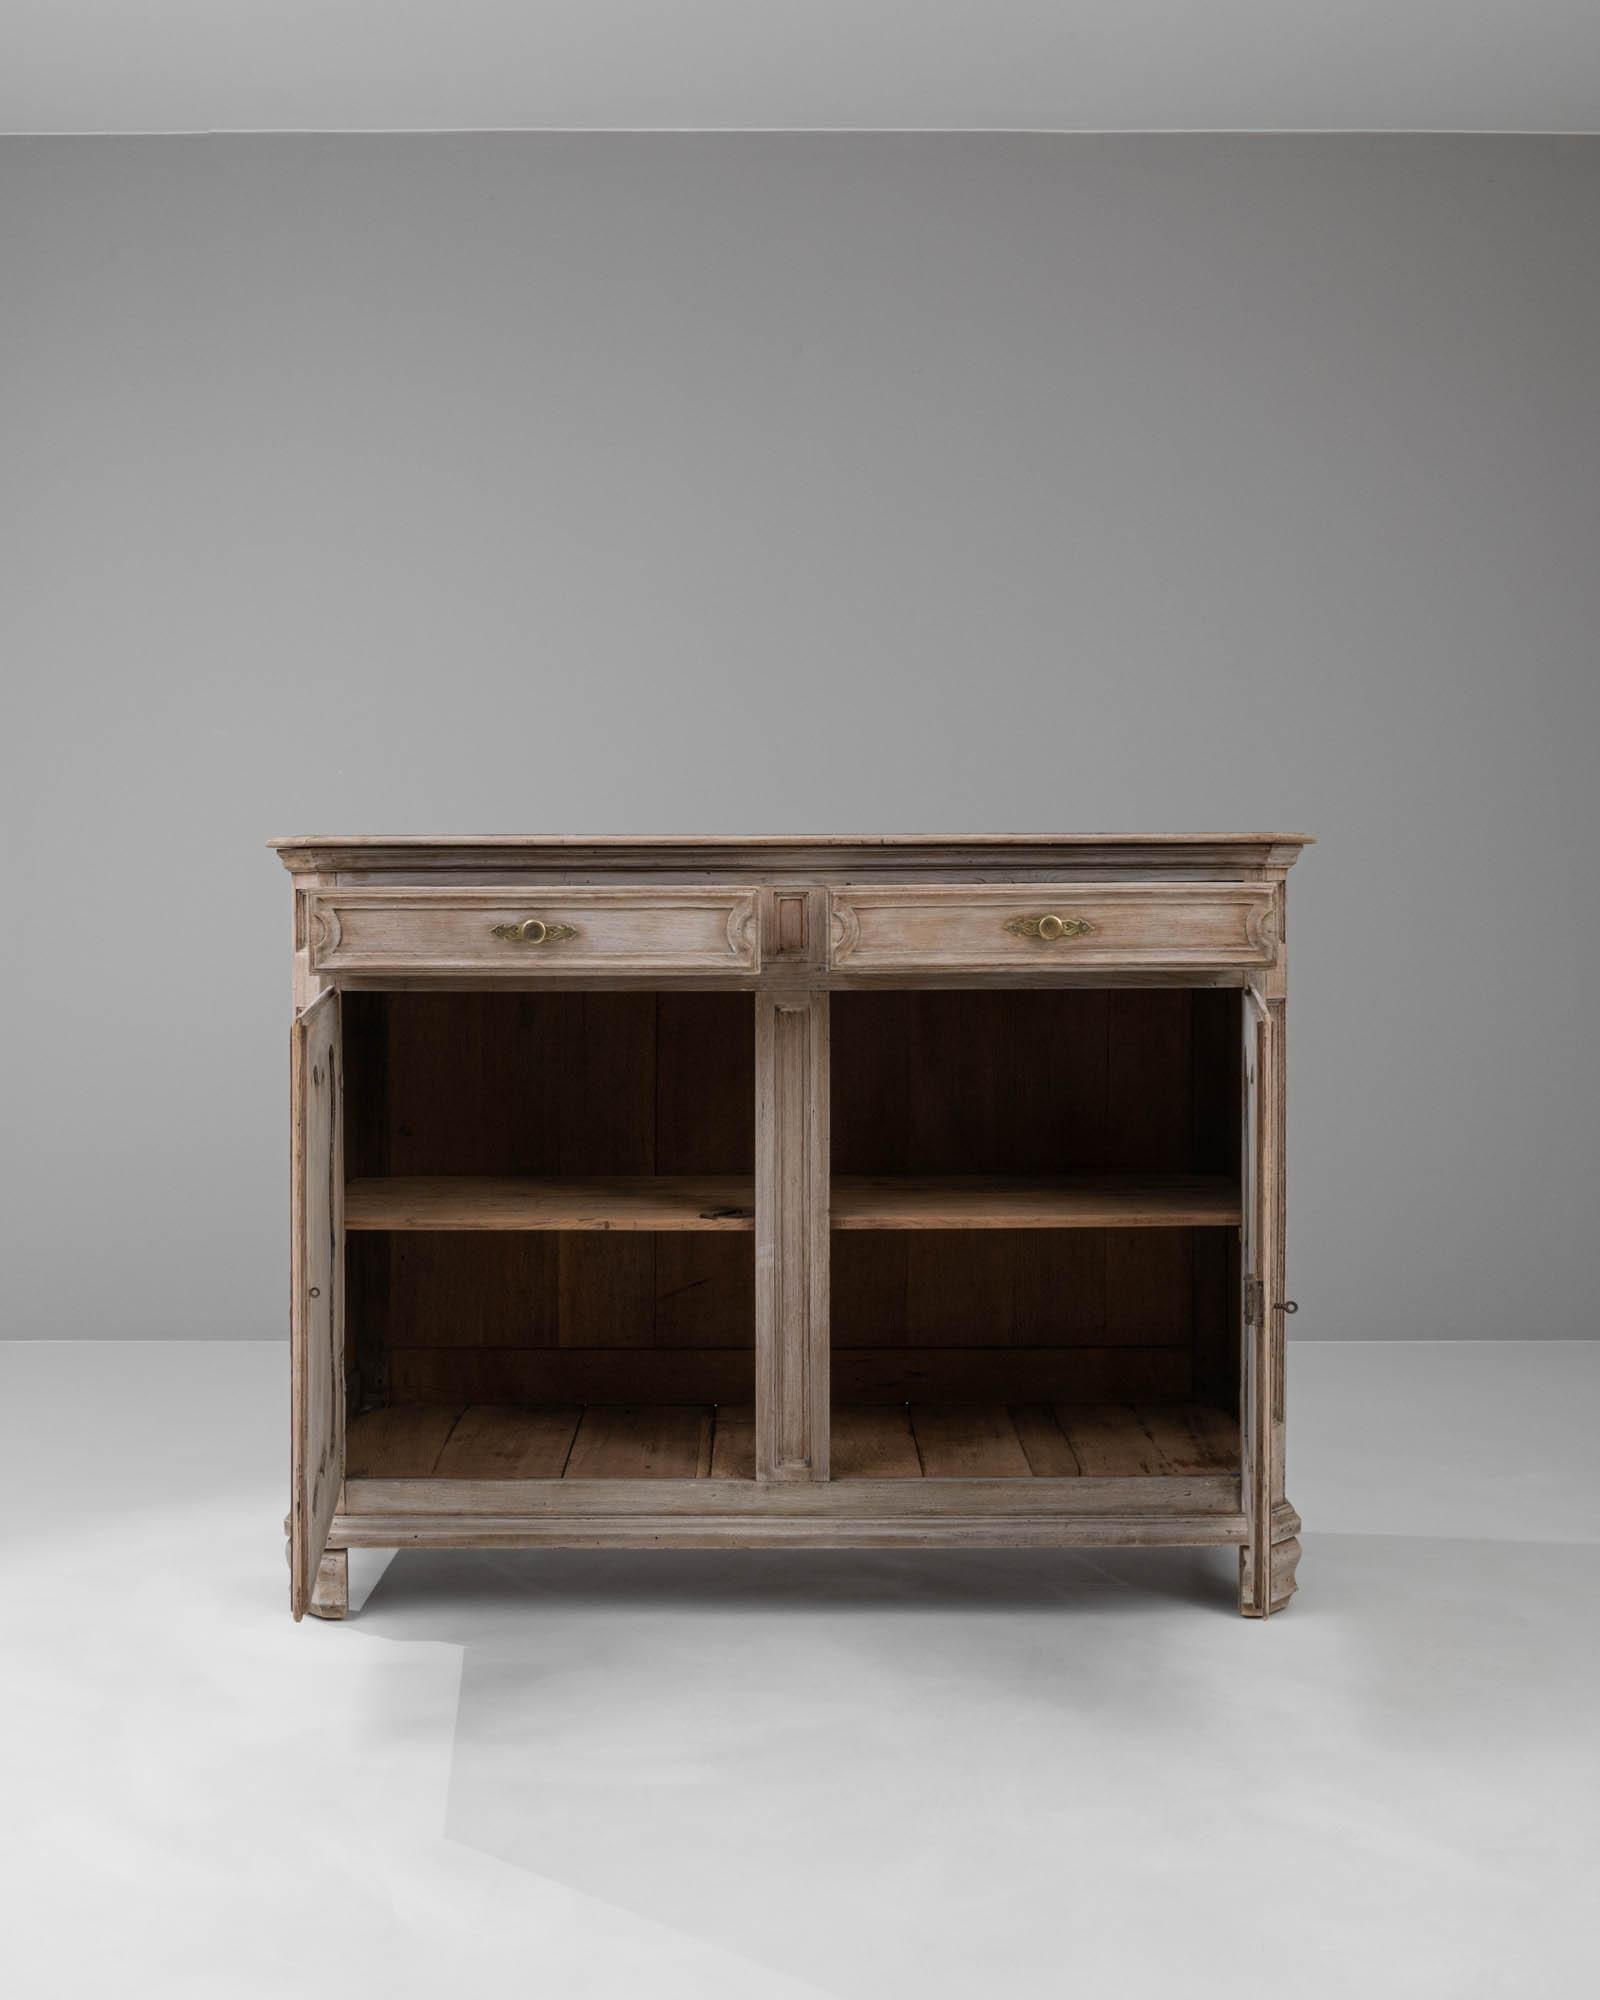 Step back into the romantic elegance of the 19th century with this stunning French bleached oak buffet. Meticulously crafted from rich oak, this piece has been carefully bleached to achieve a soft, weathered patina that highlights the intricate